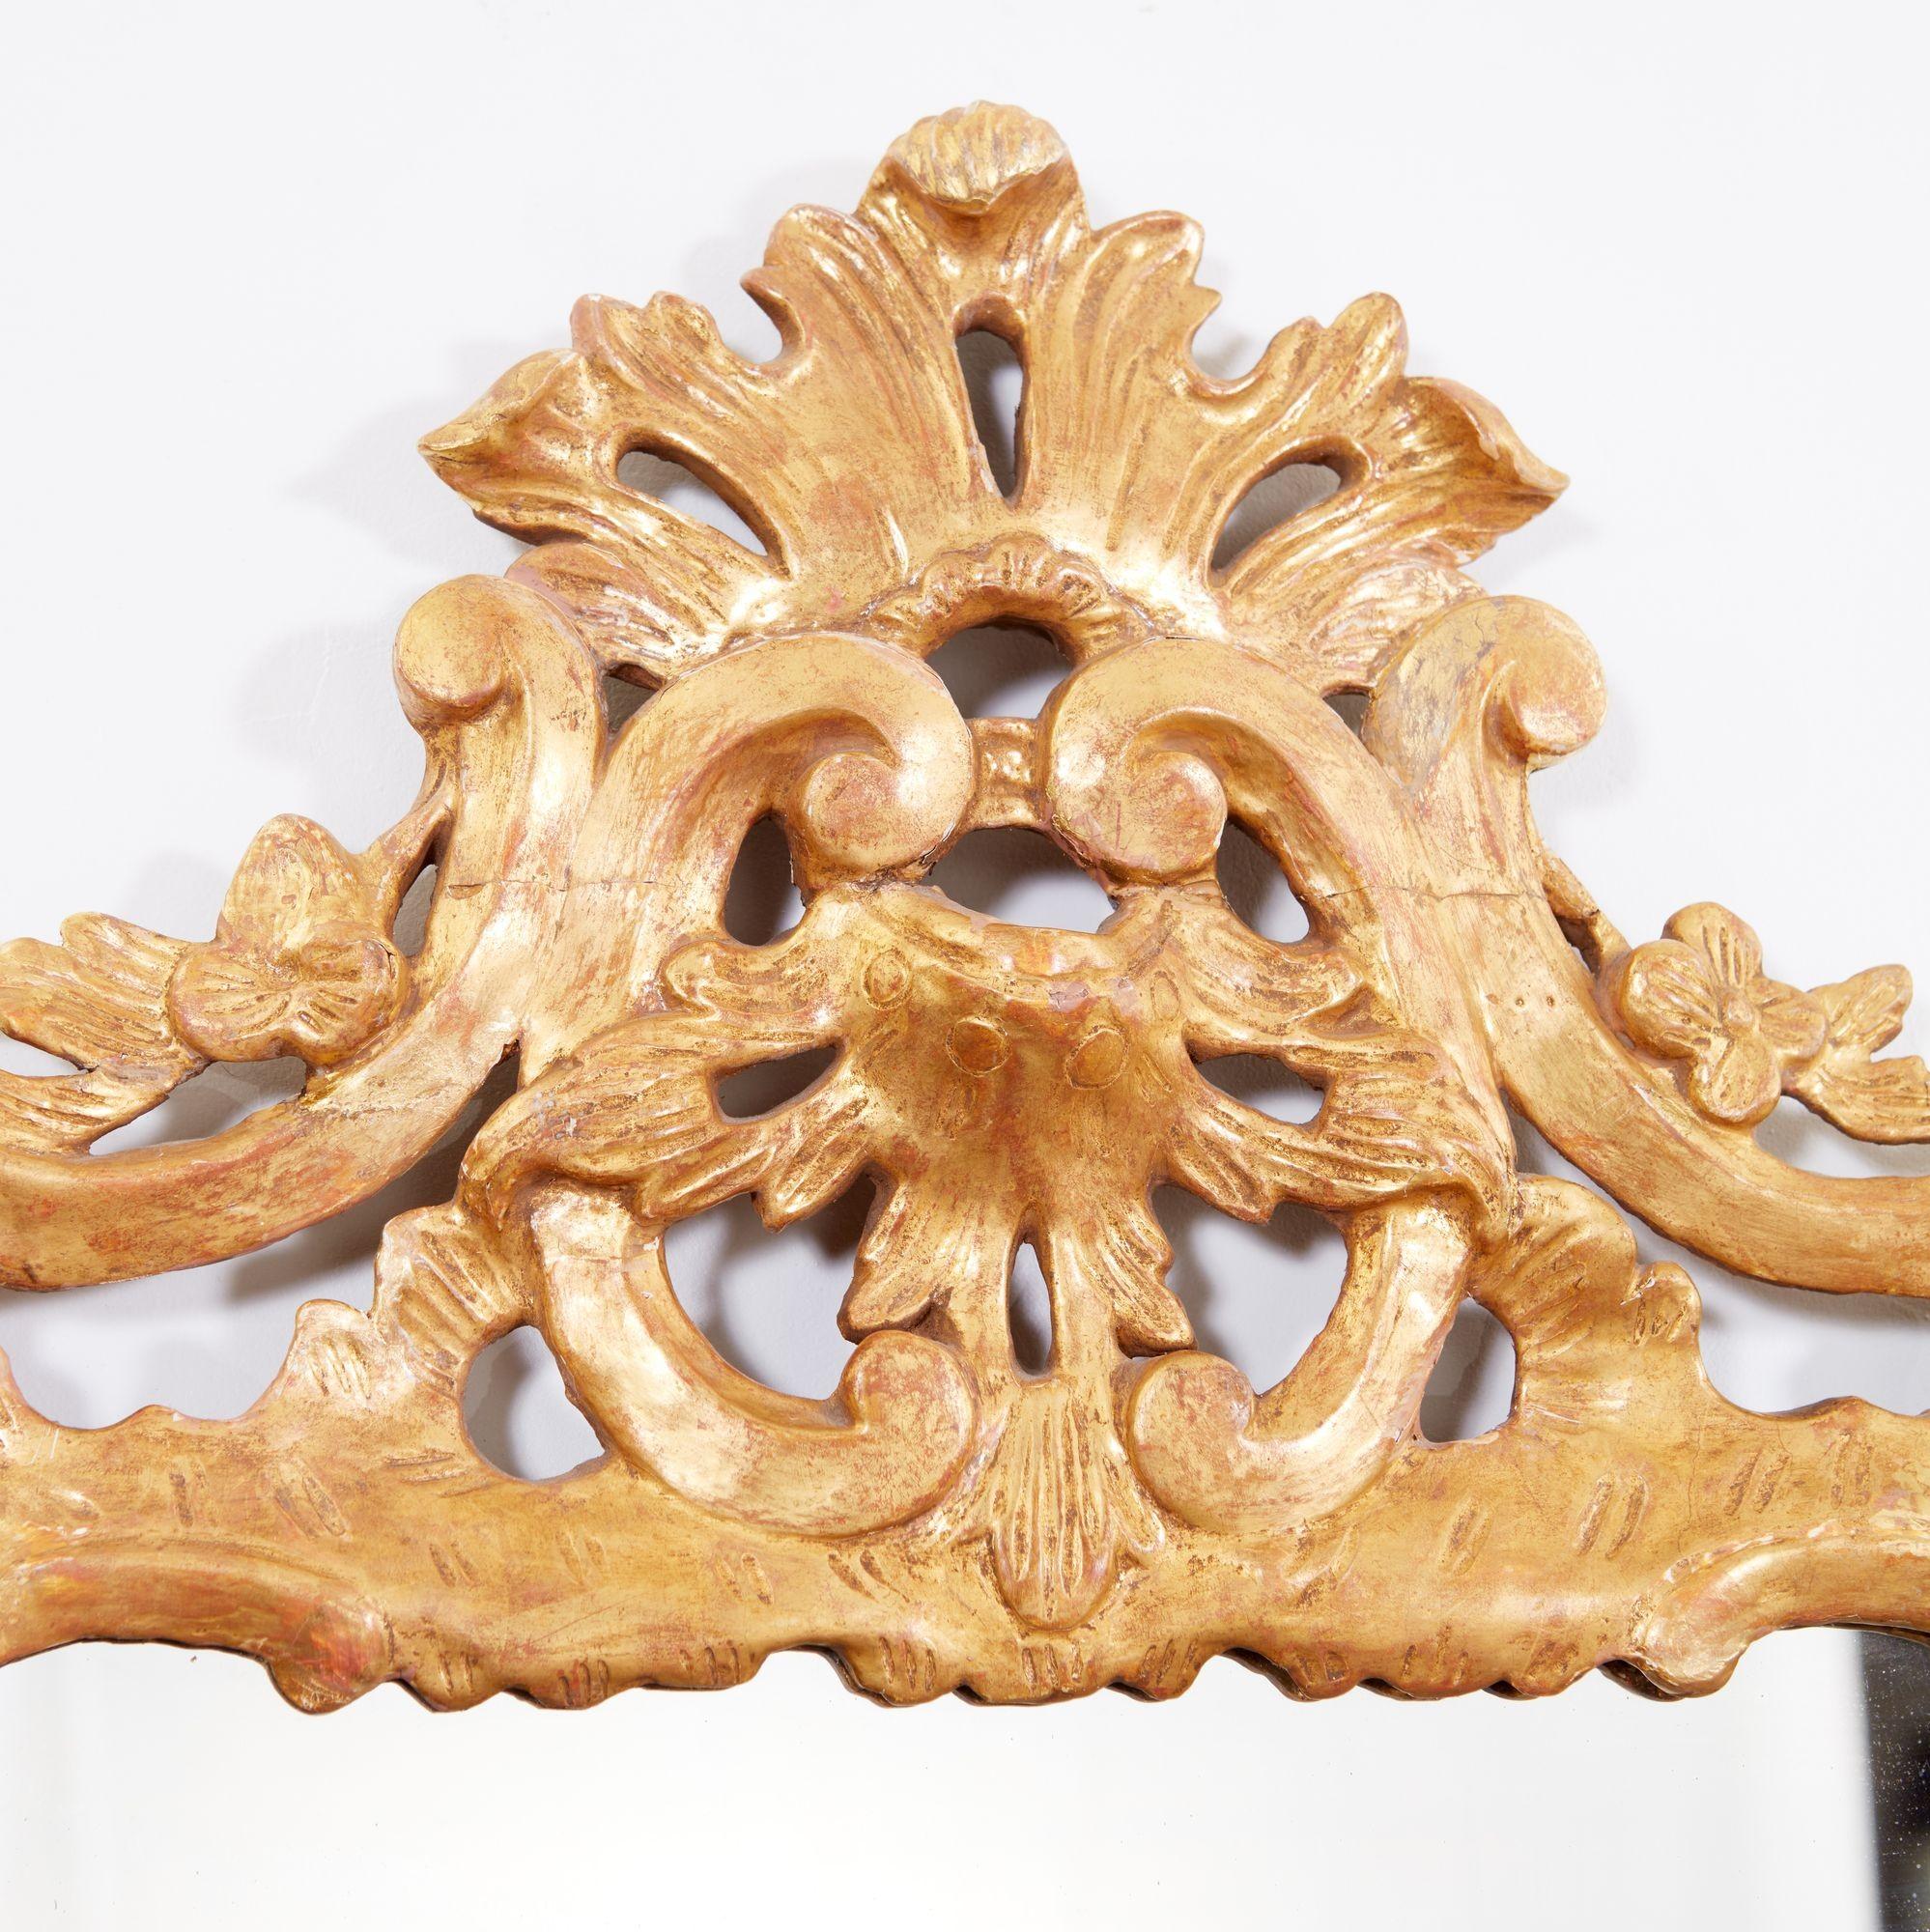 Mid-18th century English carved and gilt rococo mirror with foliate and scroll carving, the sides with vines of flowers and leaves and with scrolled acanthus leaf flourishes.